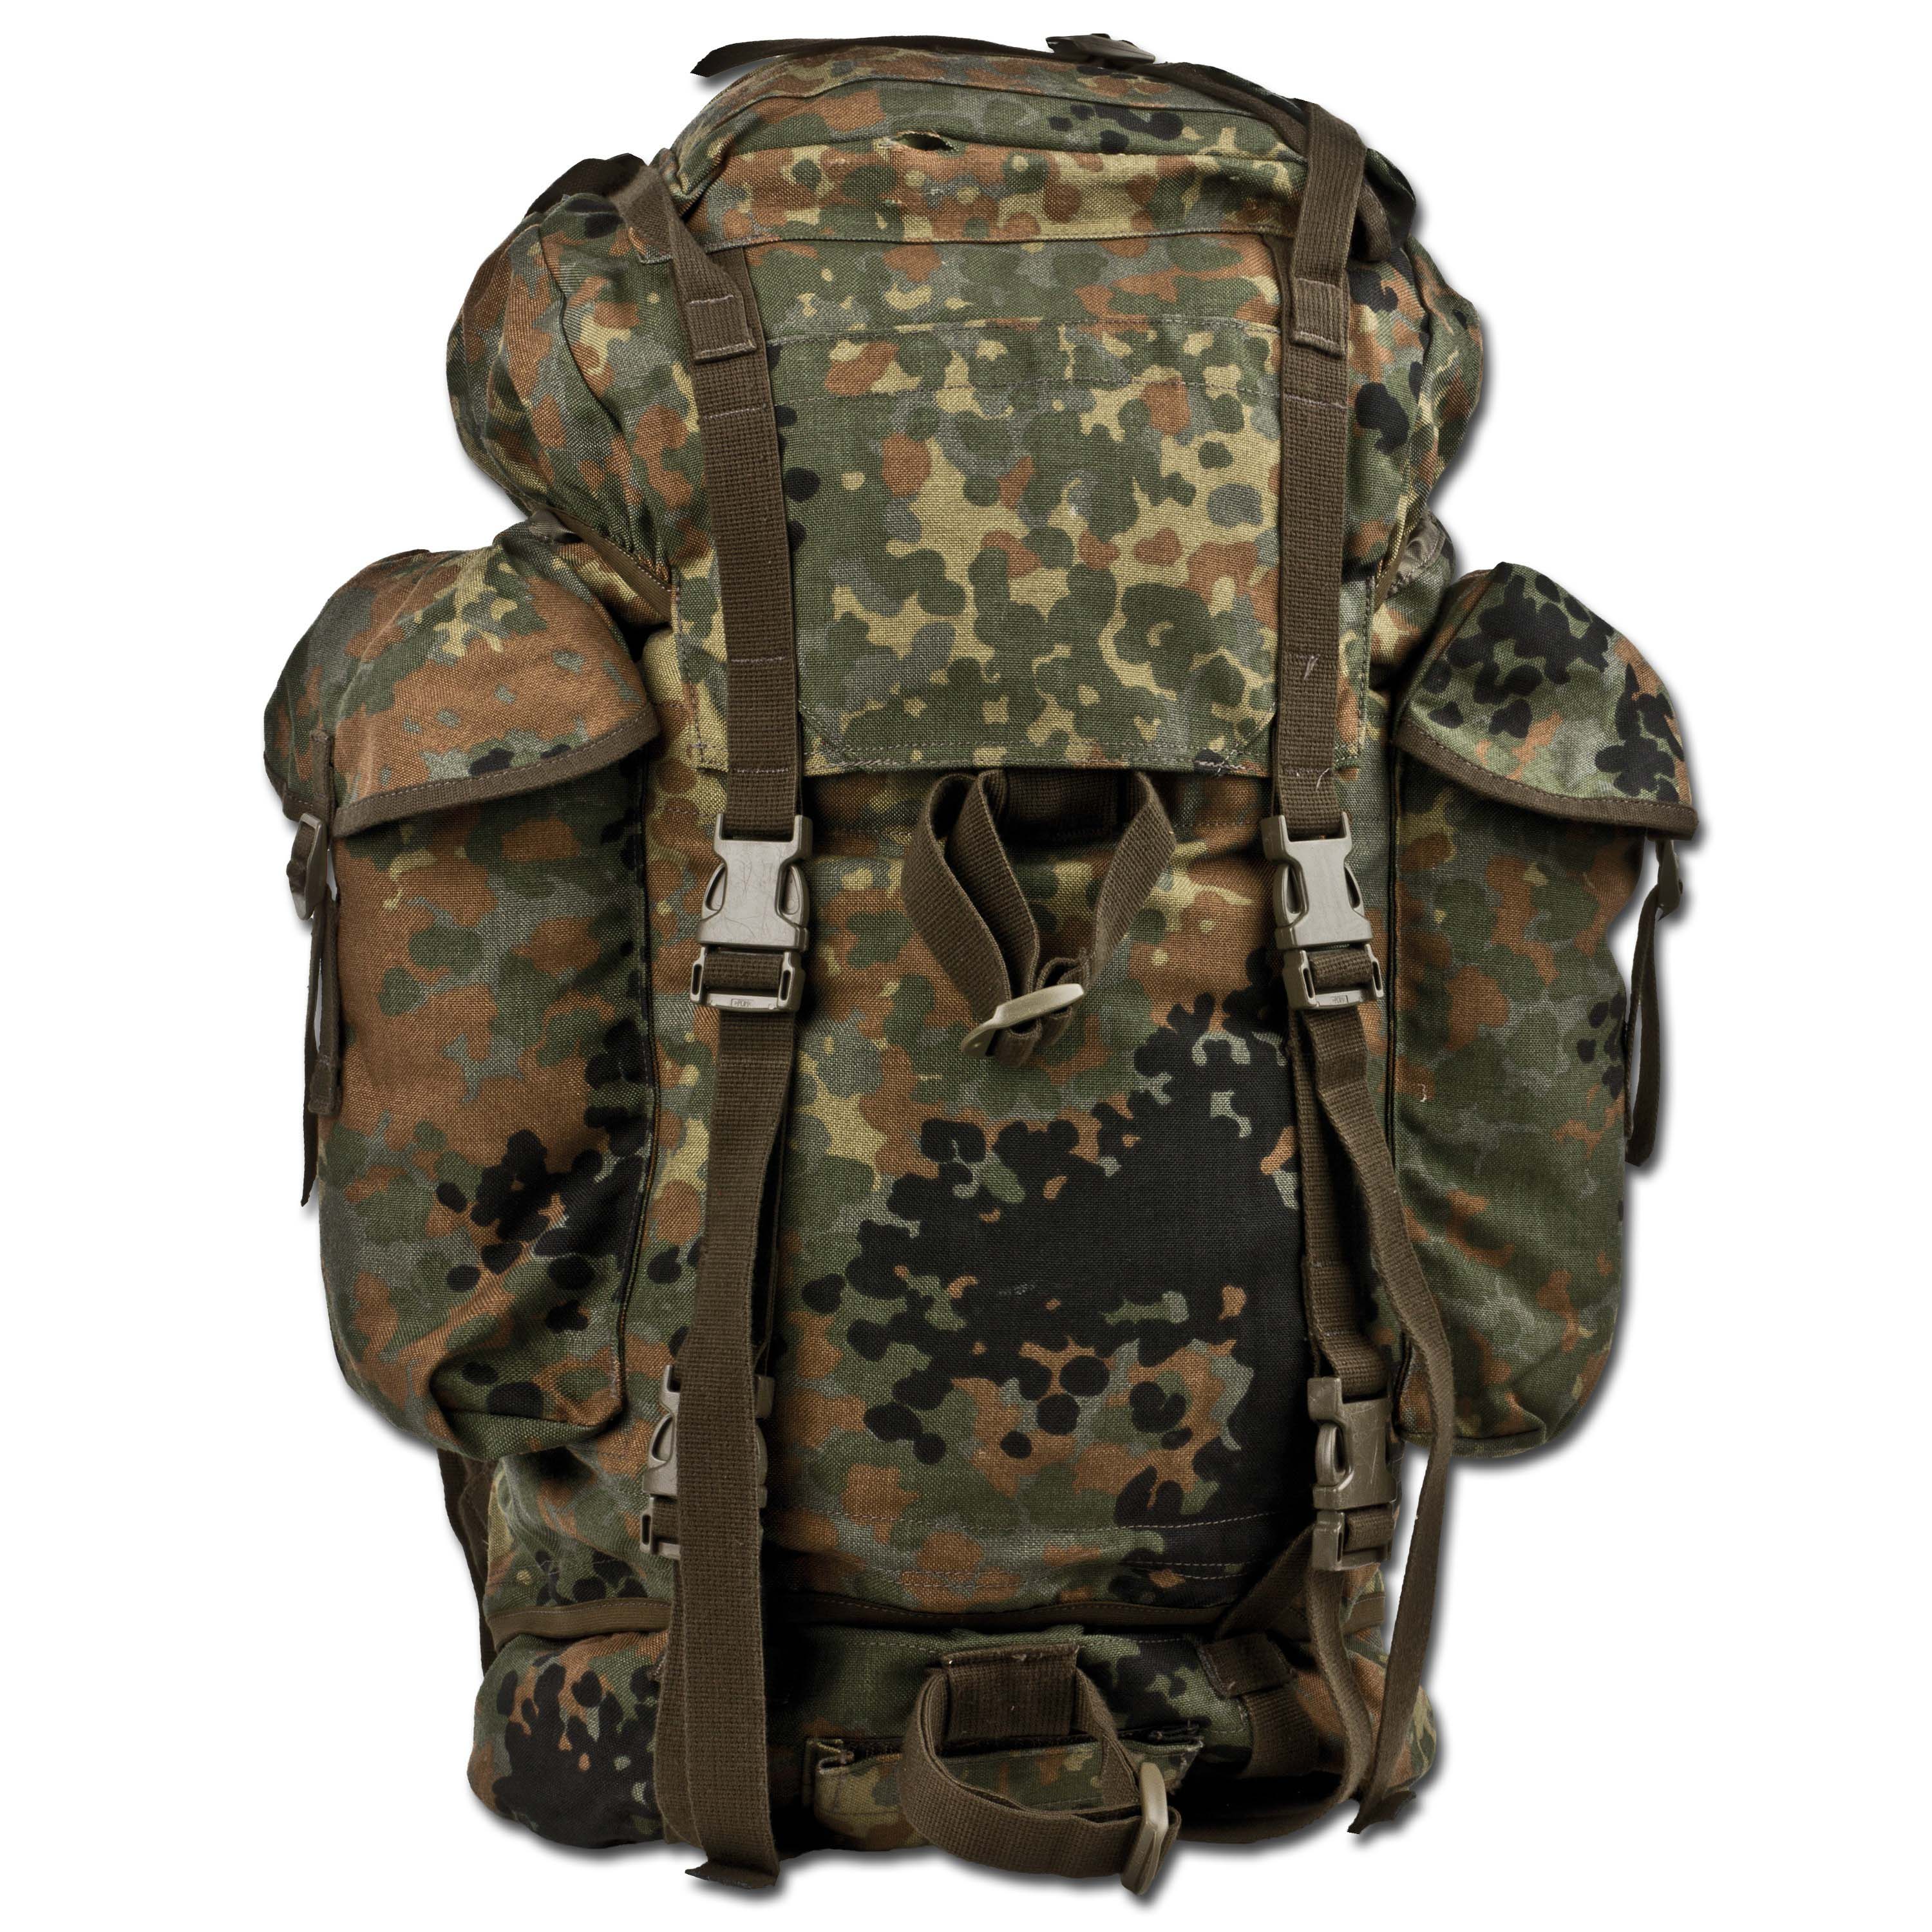 Camouflage Army Backpack German Armed Forces Bag Camo Military Camoflauge 